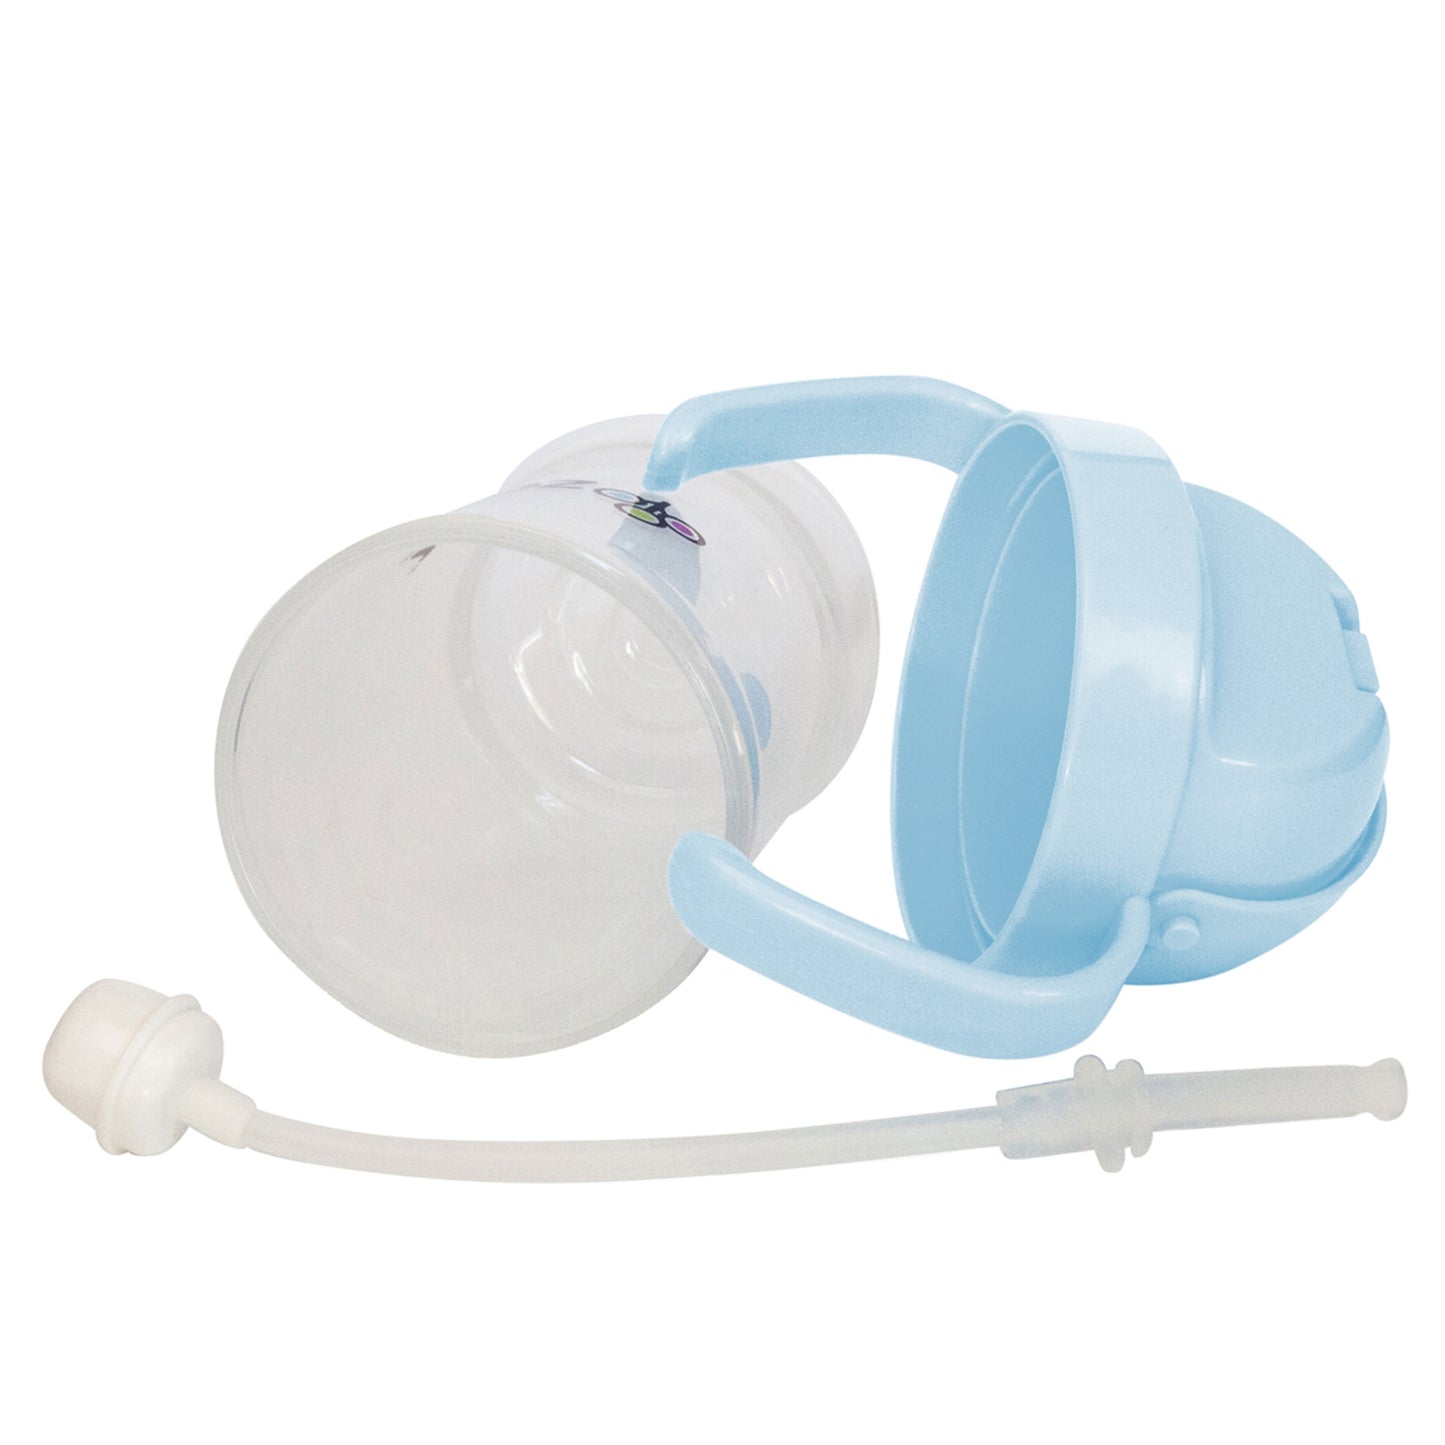 Bot weighted straw sippy cup - Mist Blue